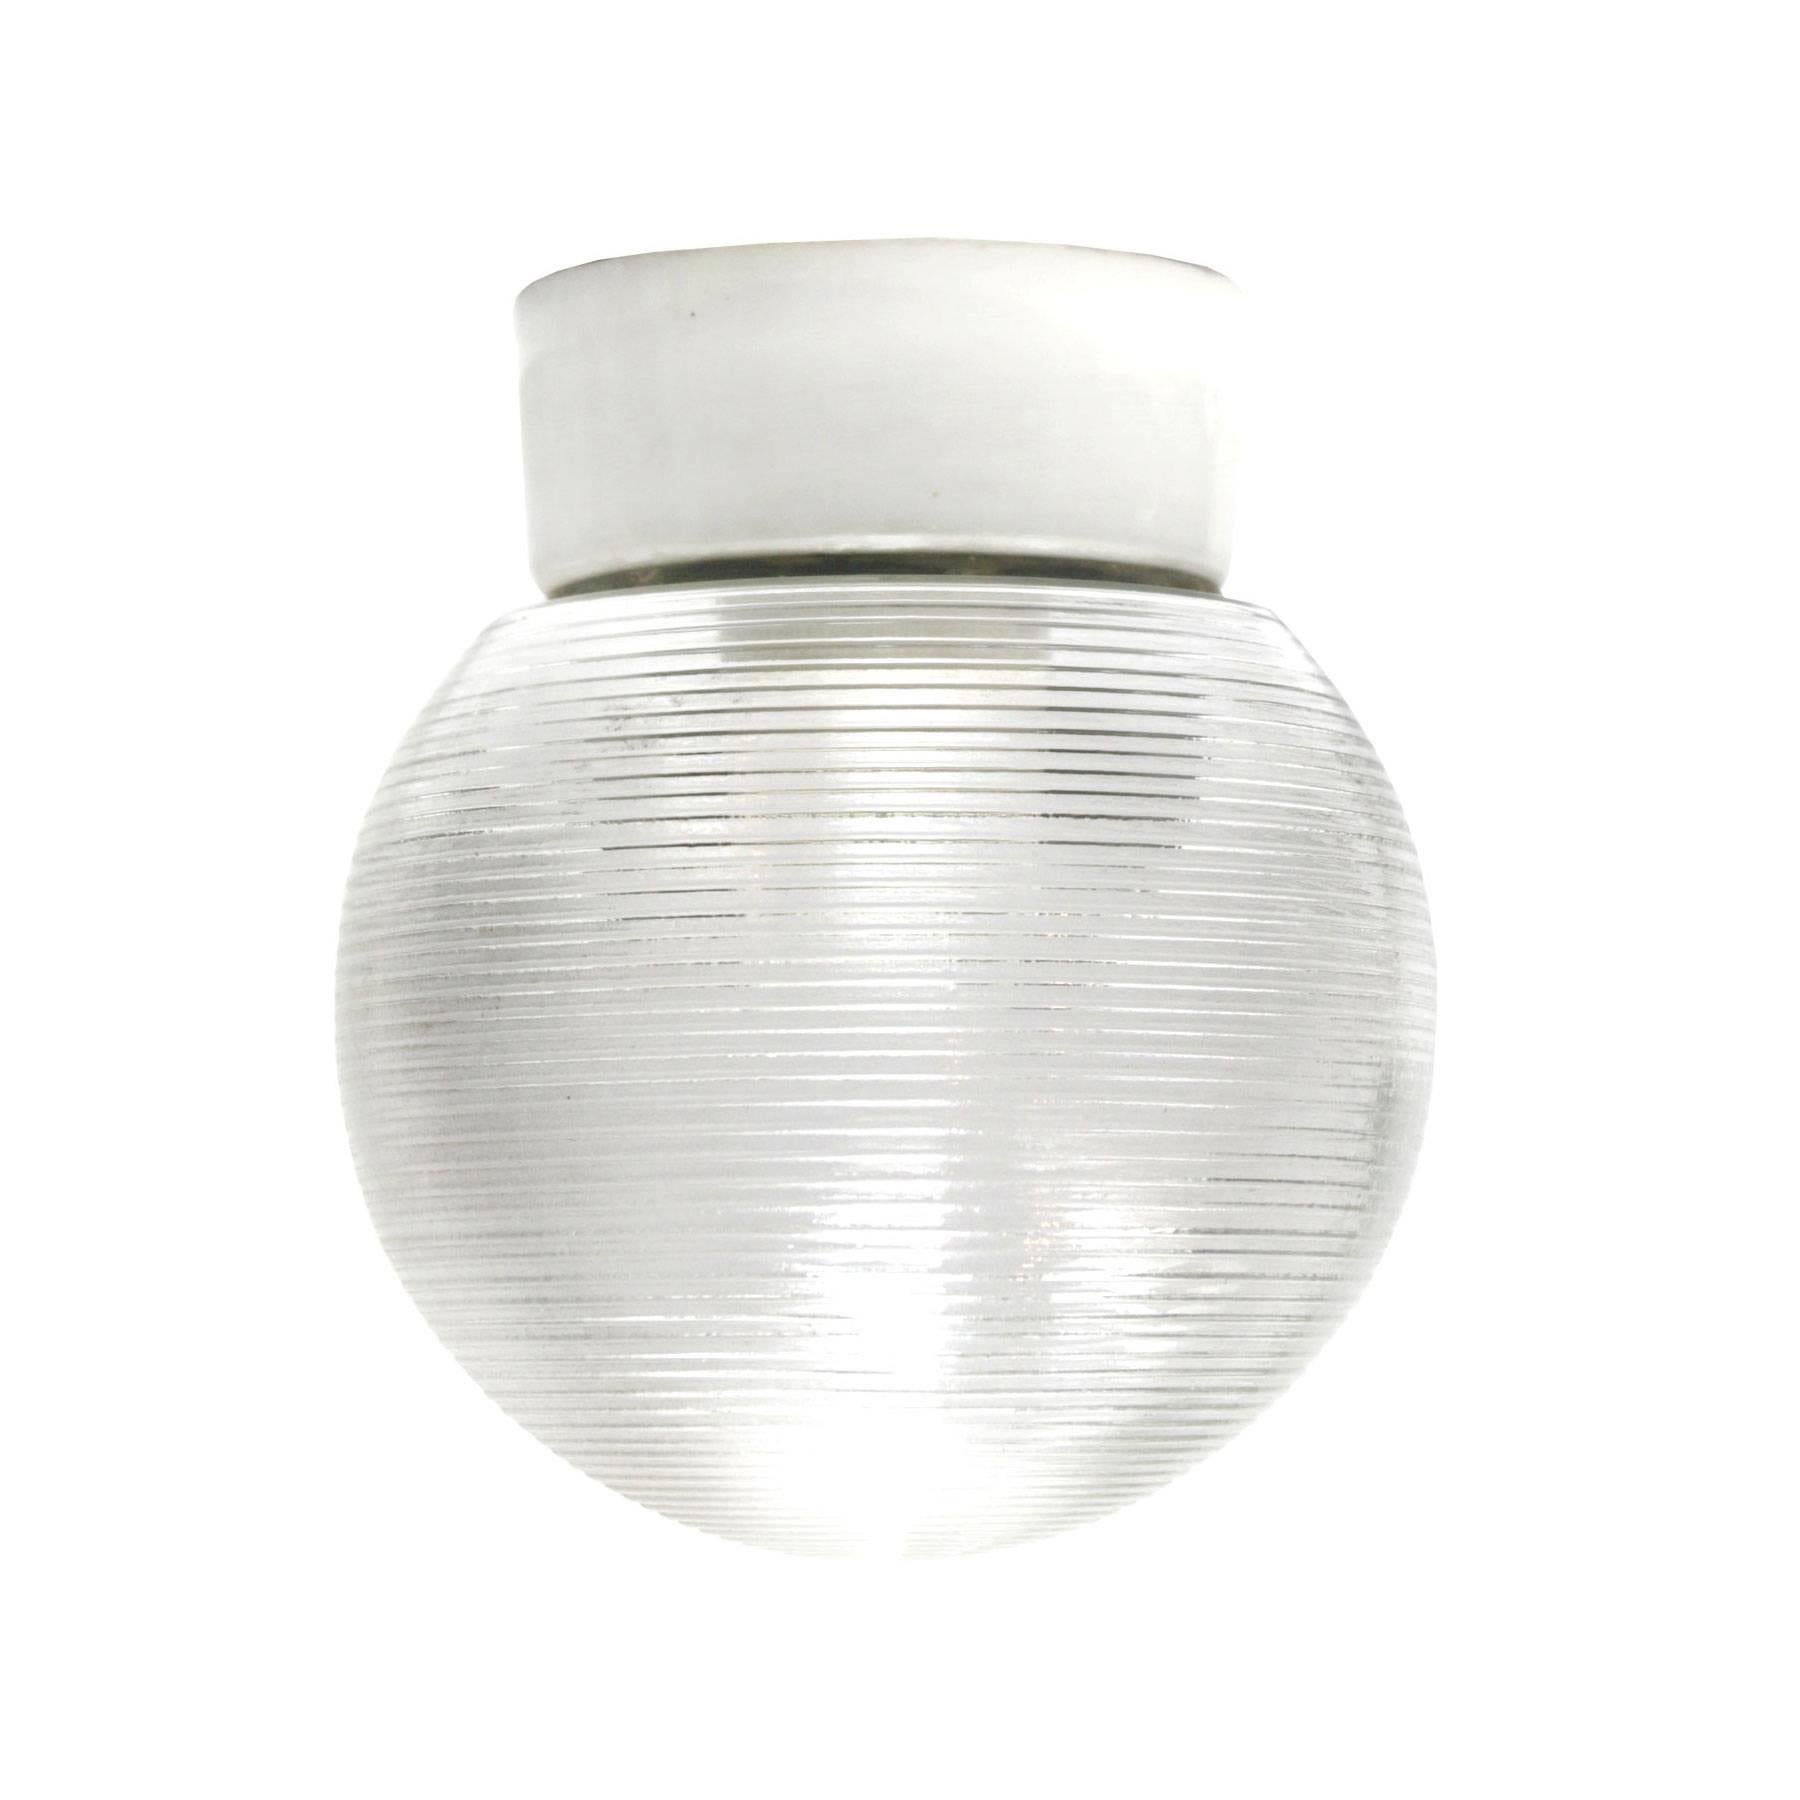 Industrial ceiling lamp. White porcelain. Striped glass.
Two conductors. No ground.

Weight: 0.9 kg / 2 lb

All lamps have been made suitable by international standards for incandescent light bulbs, energy-efficient and LED bulbs. E26/E27 bulb